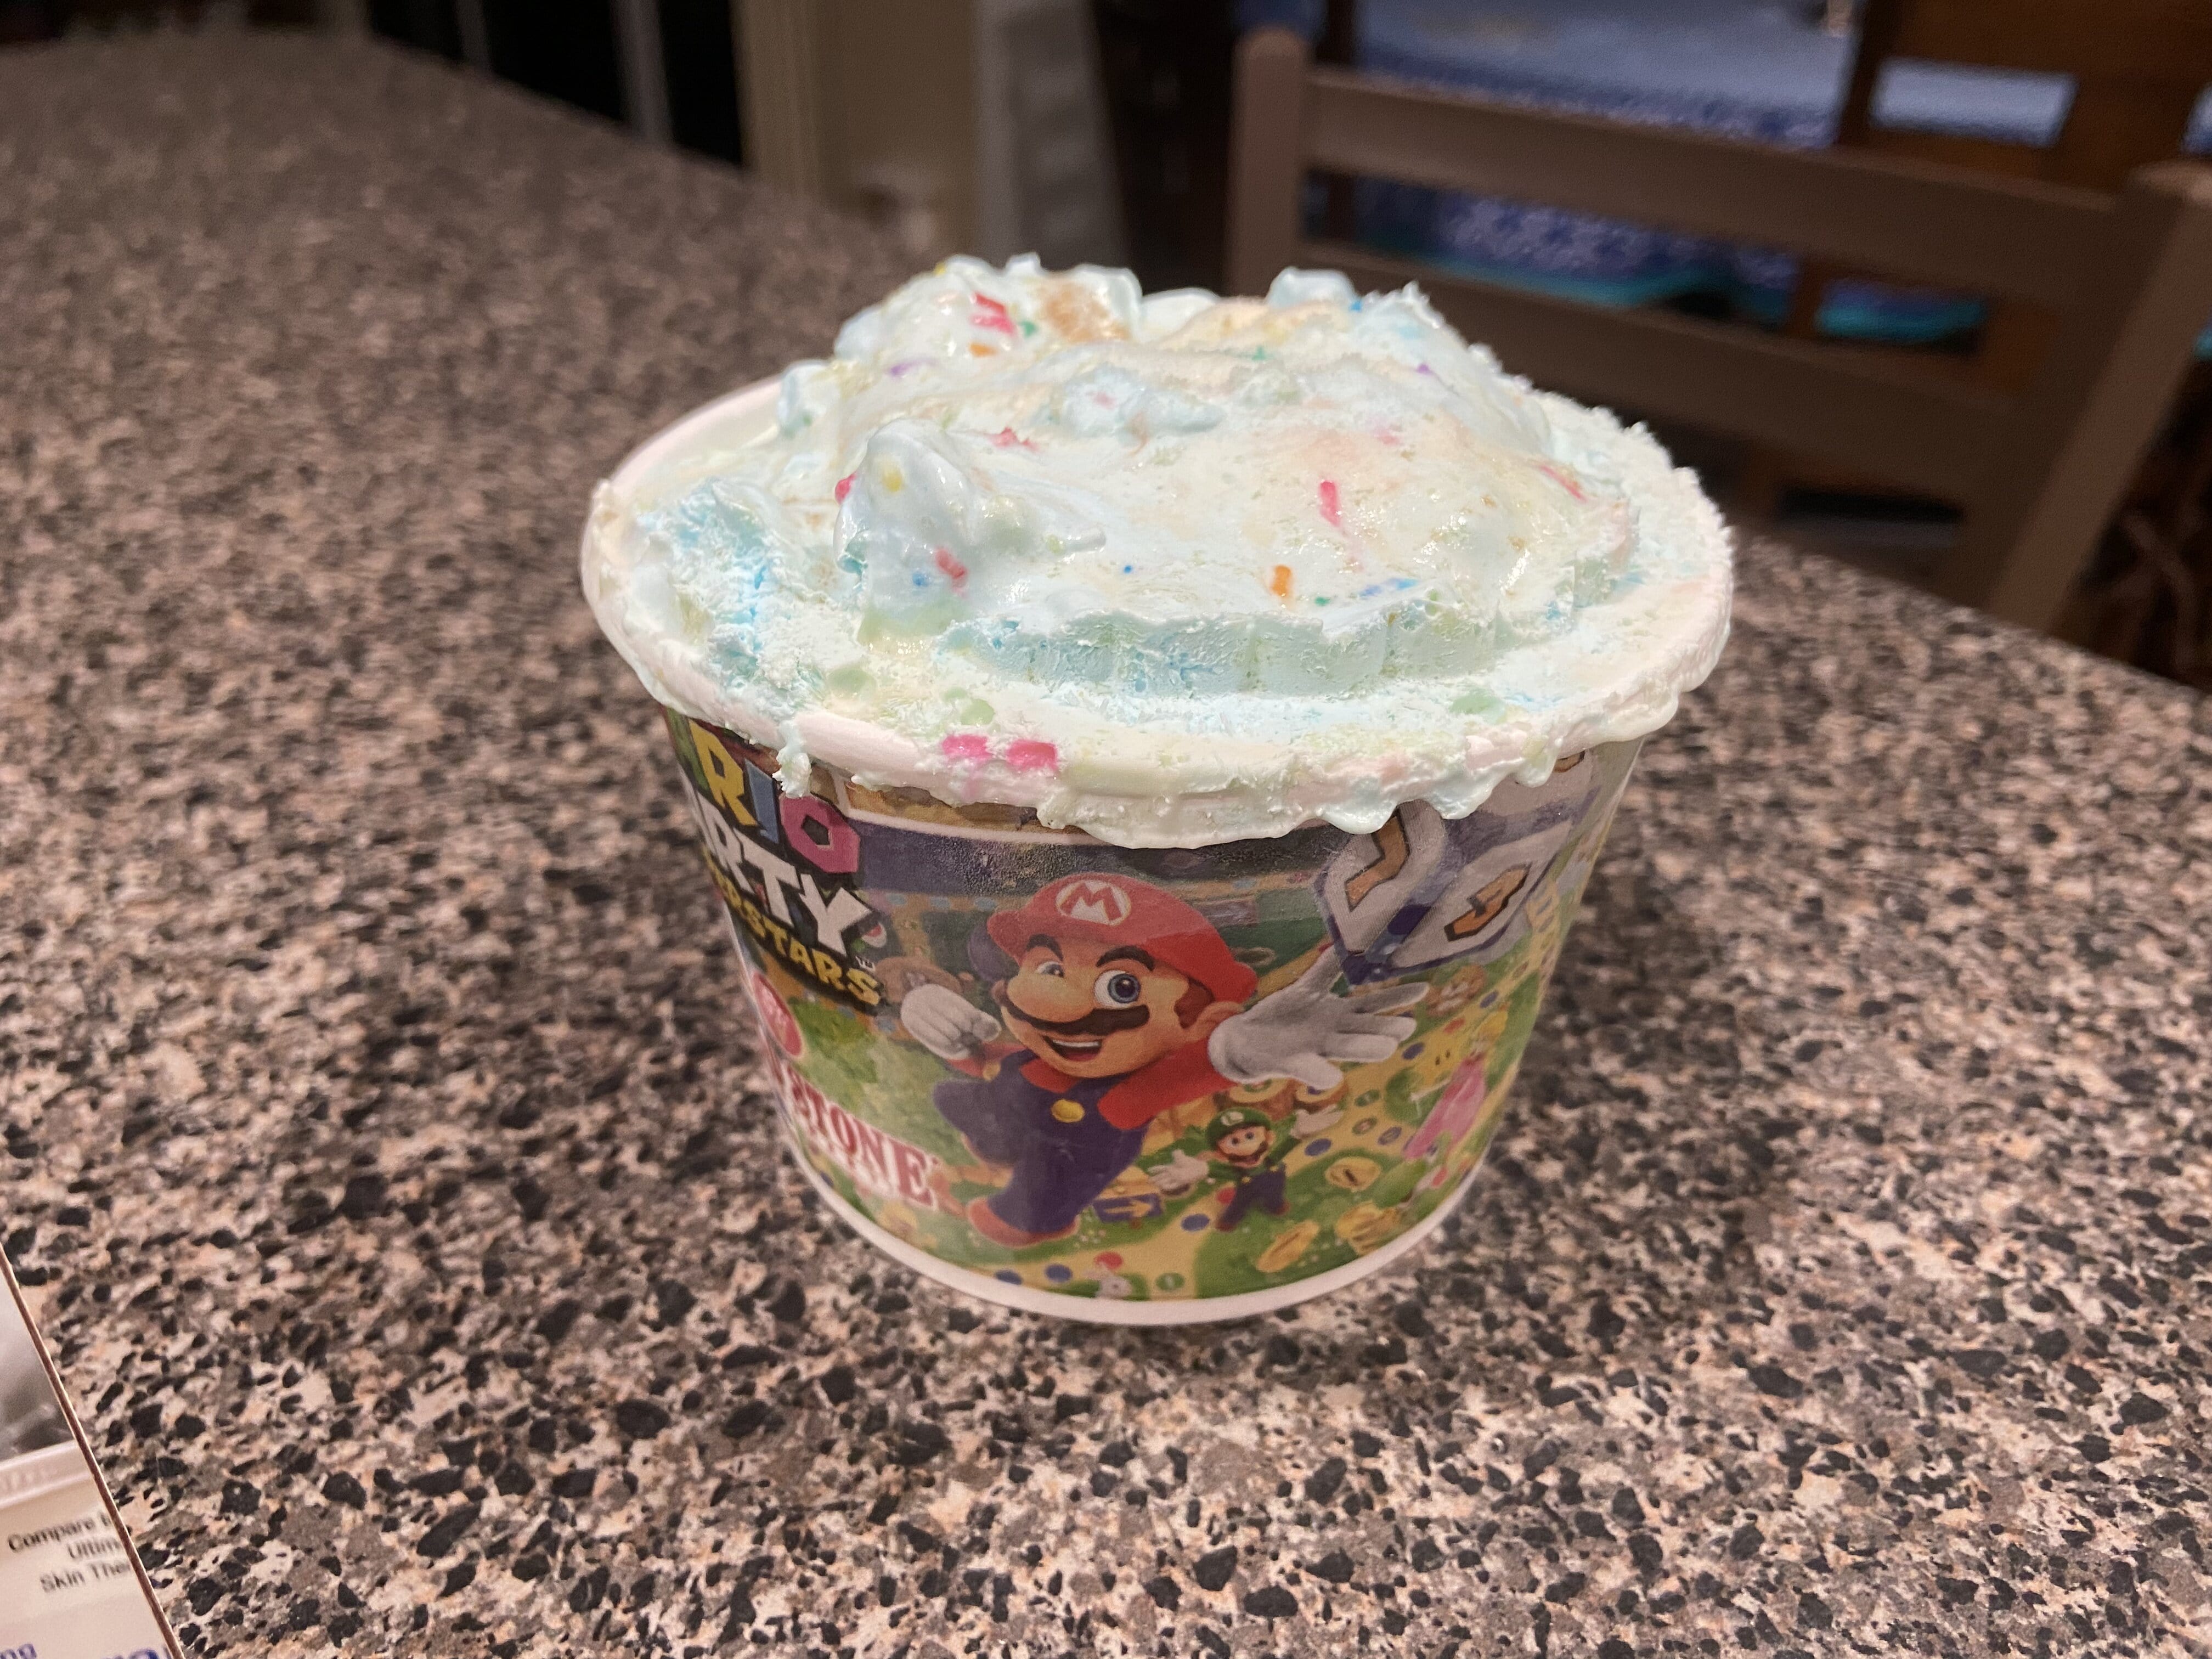 Cold Stone's Mario ice cream sits in a container.